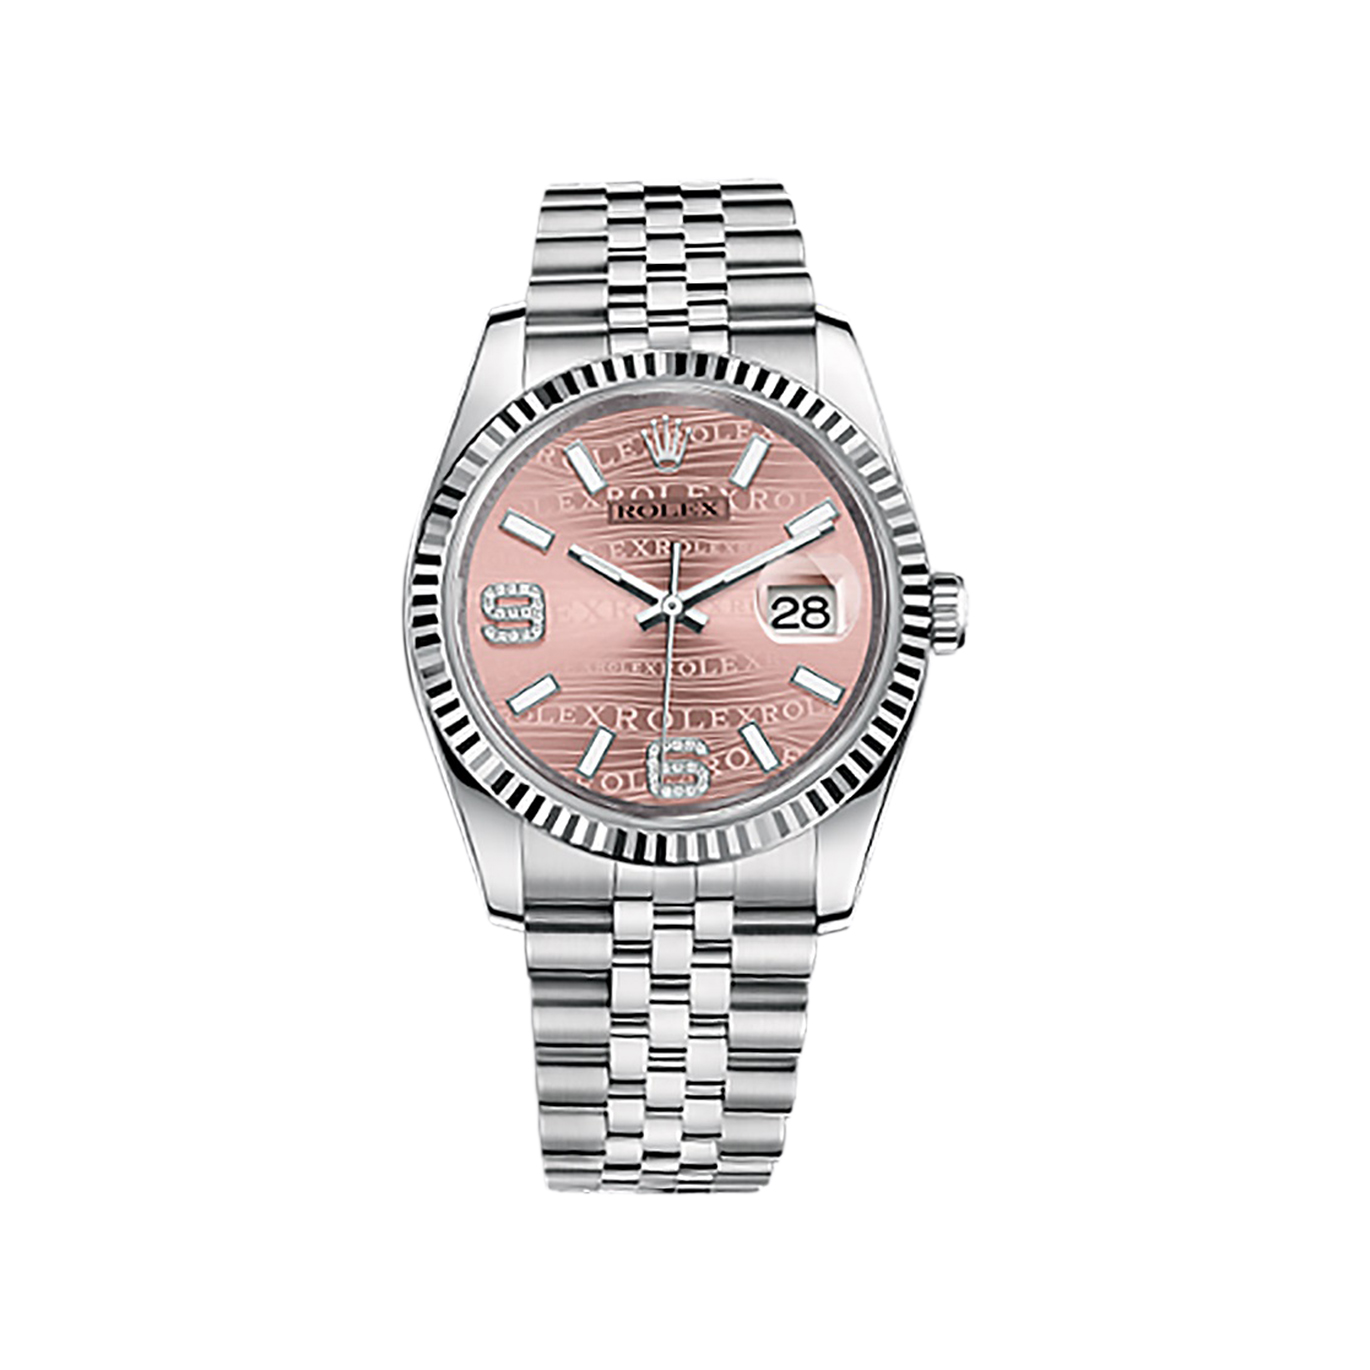 Datejust 36 116234 White Gold & Stainless Steel Watch (Pink Waves Set with Diamonds)